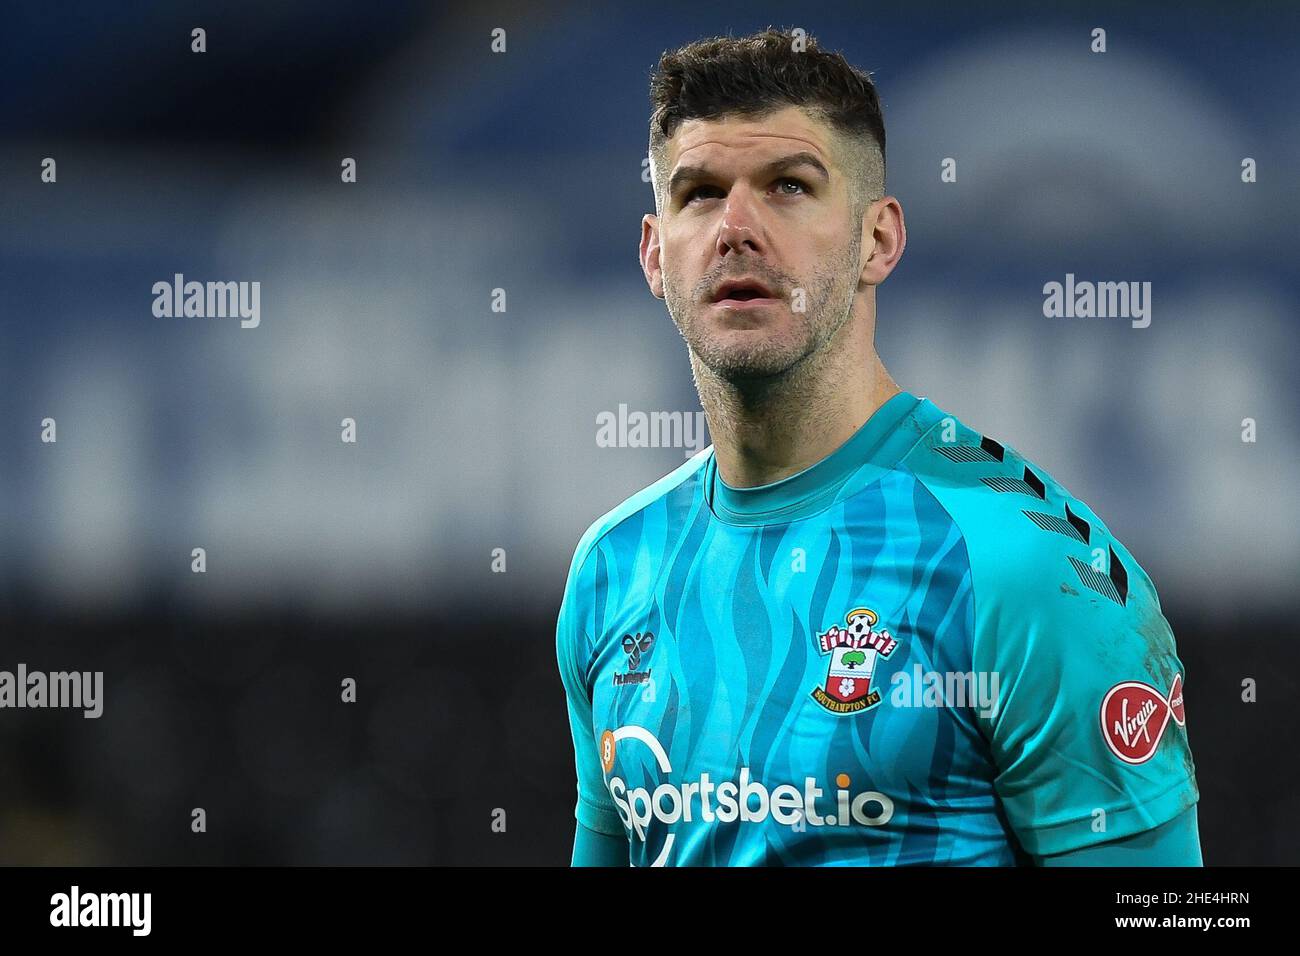 Fraser Forster #44 of Southampton during the game Stock Photo